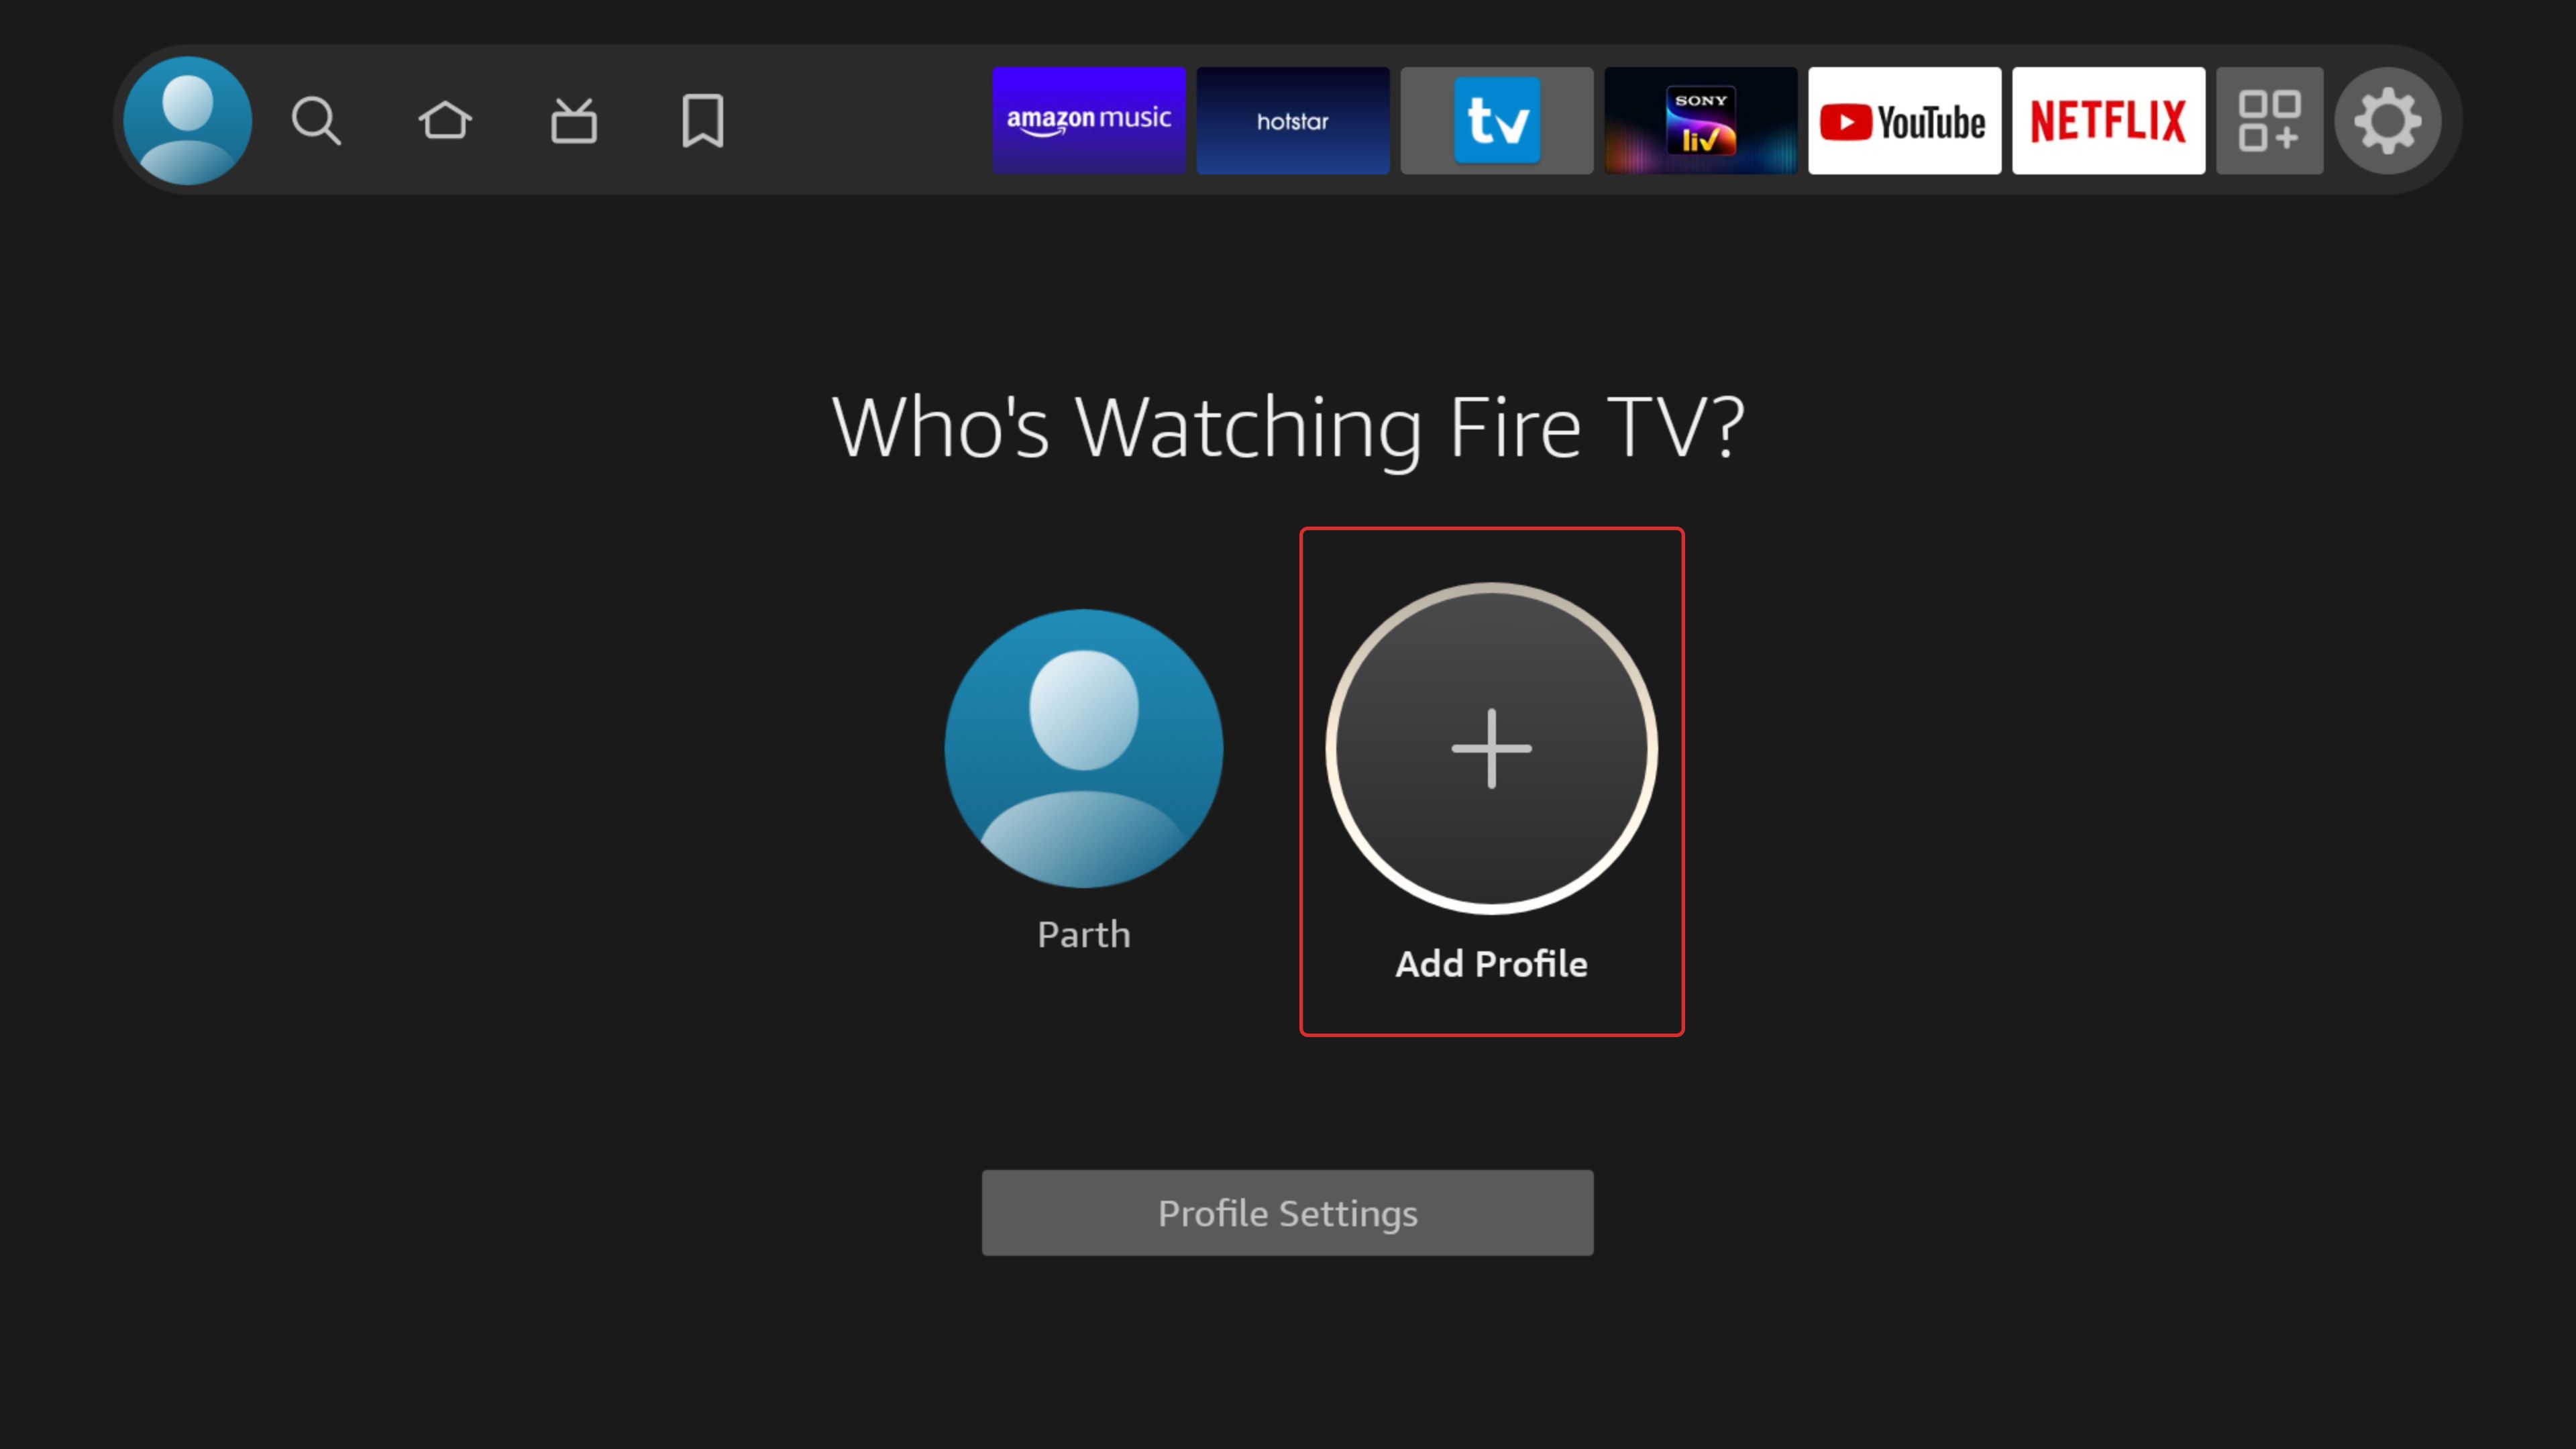 Select add profile on Fire TV